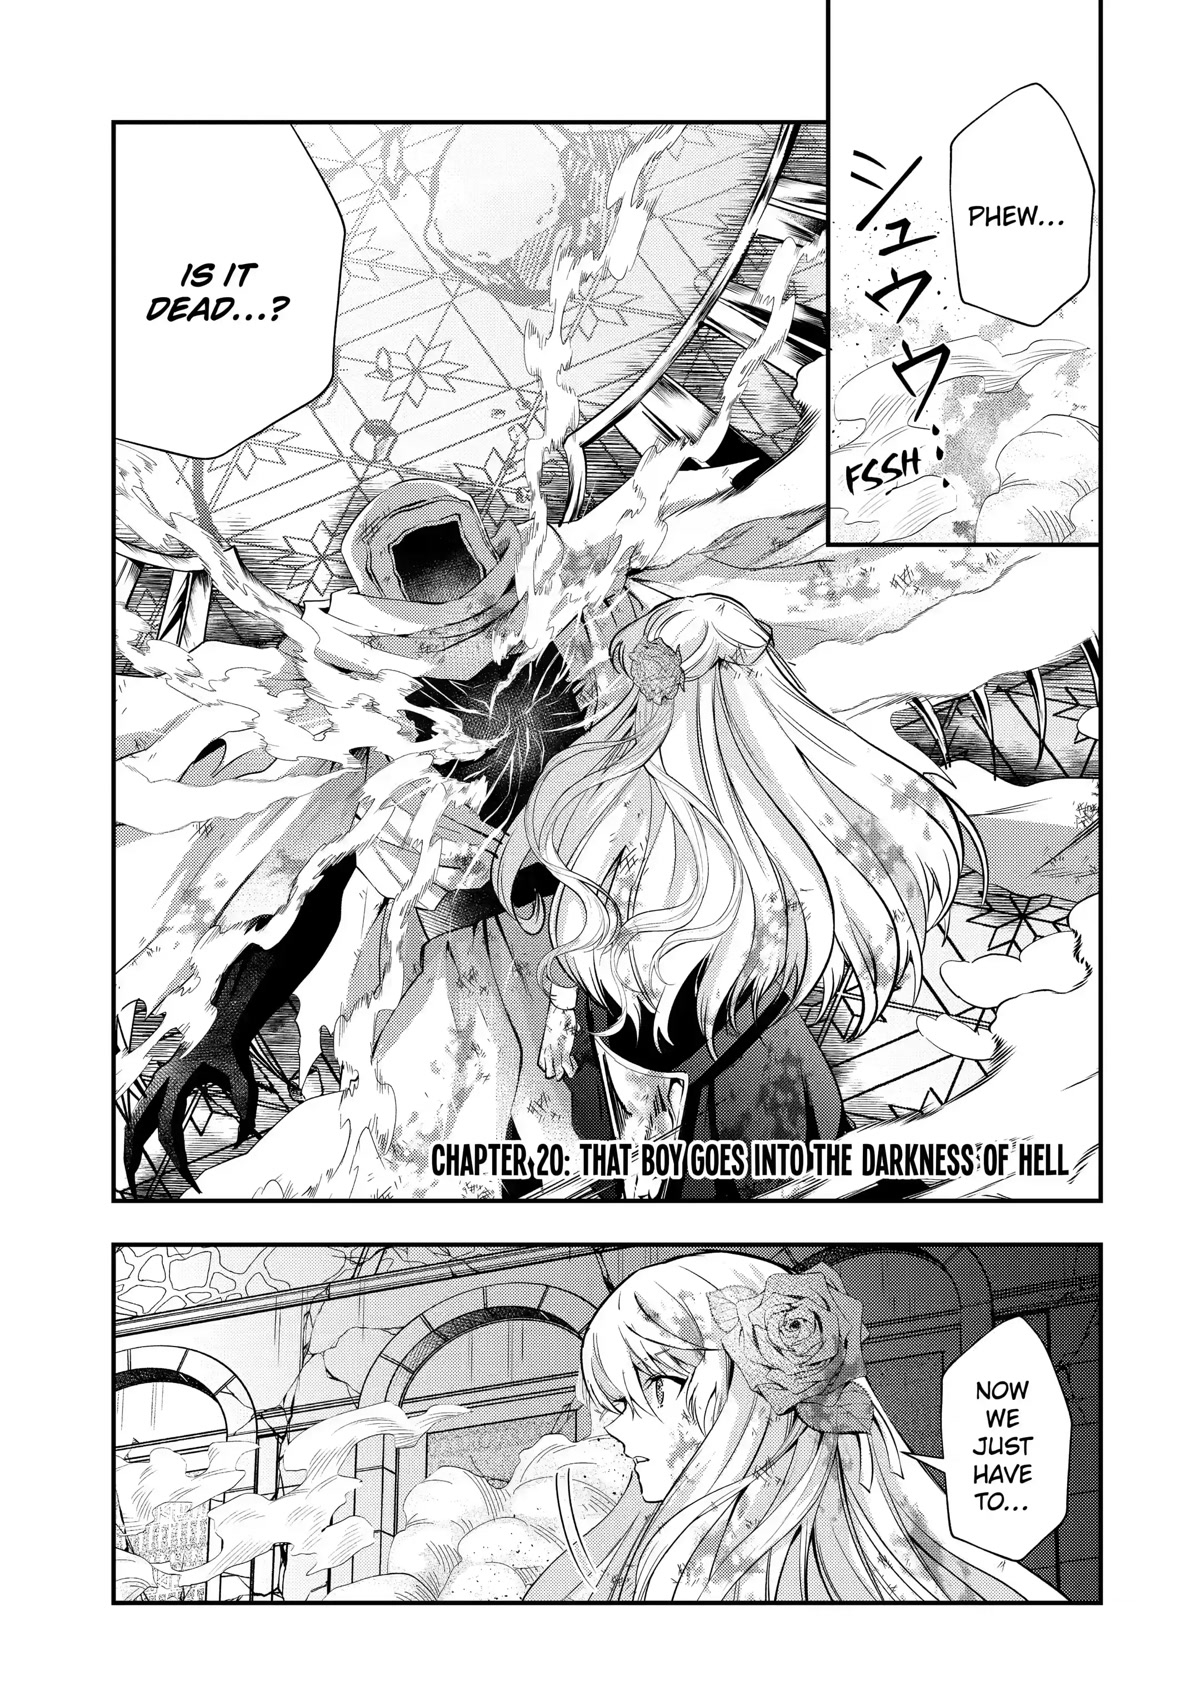 That Inferior Knight, Lv. 999 - Page 1